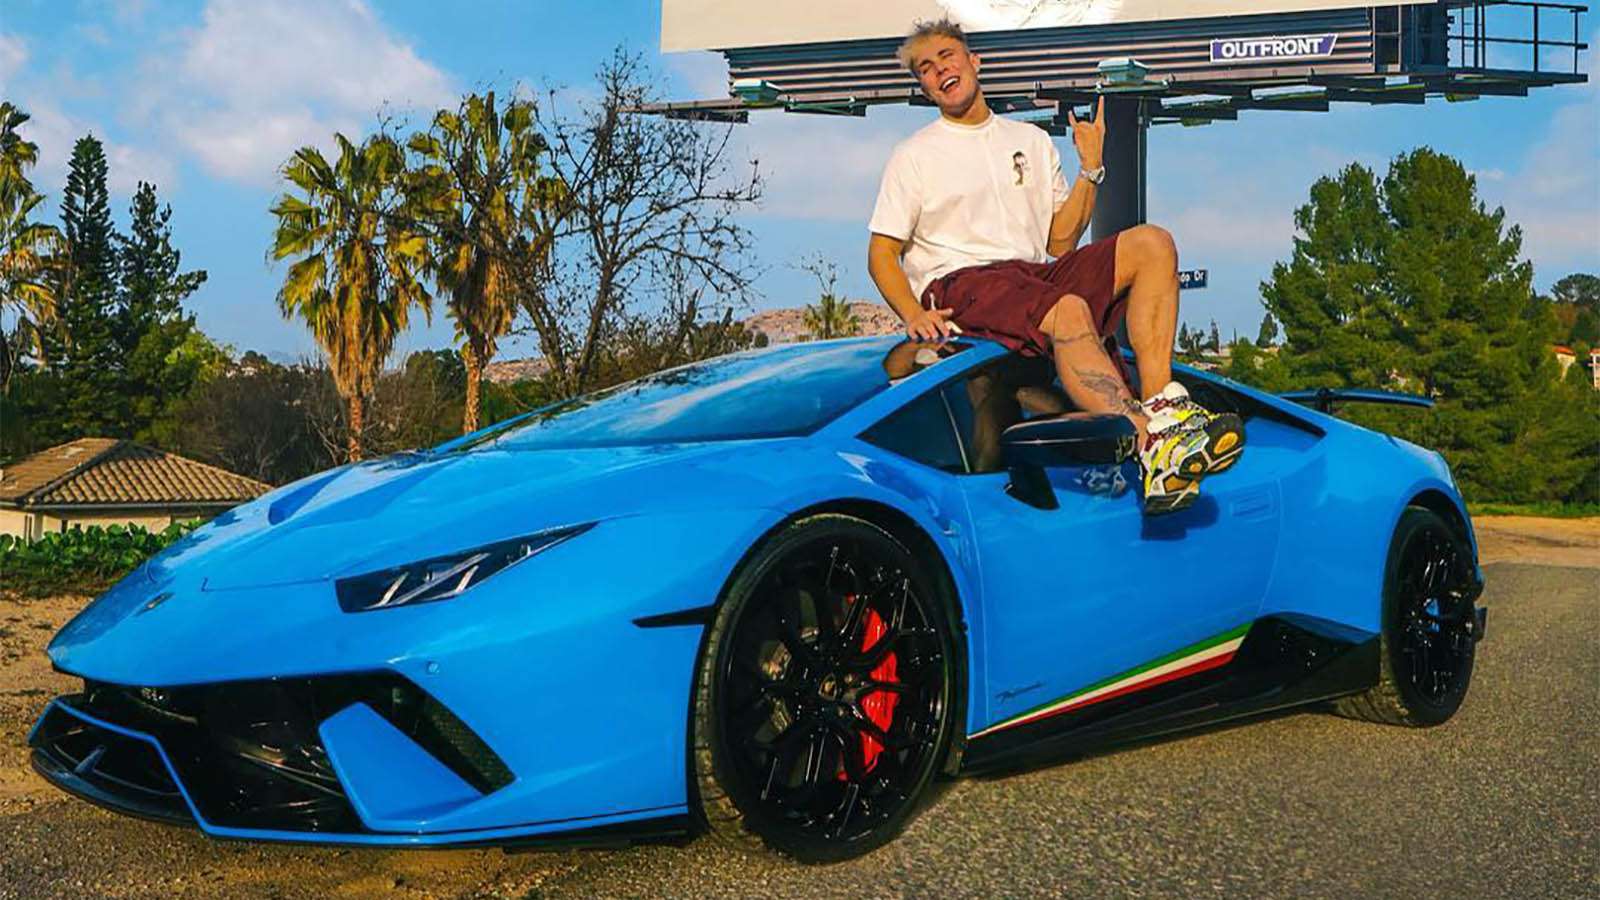 Jake Paul Car Collection